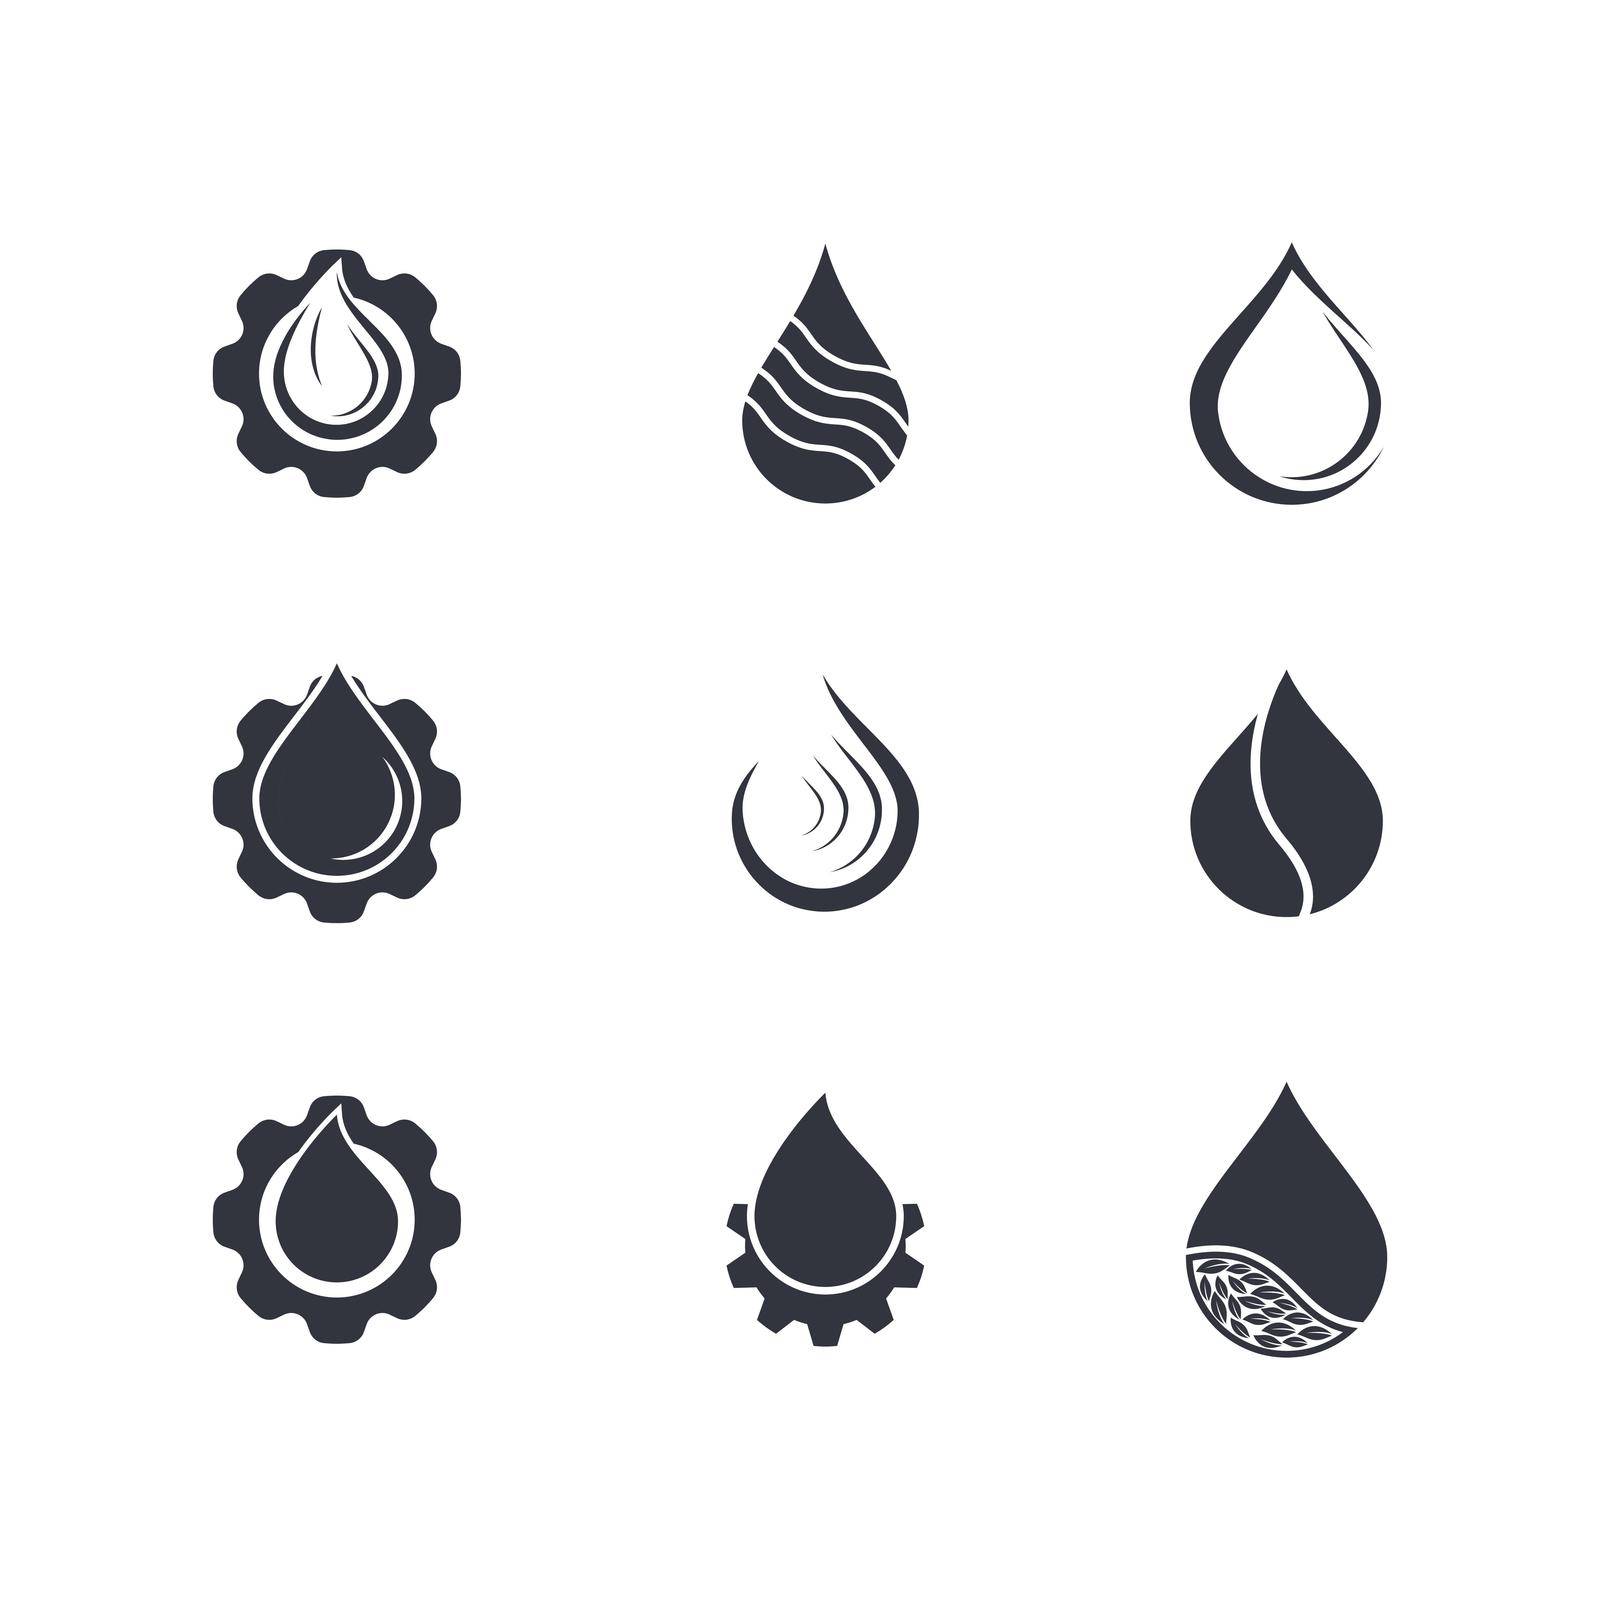 Oil and gas vector icon by Fat17